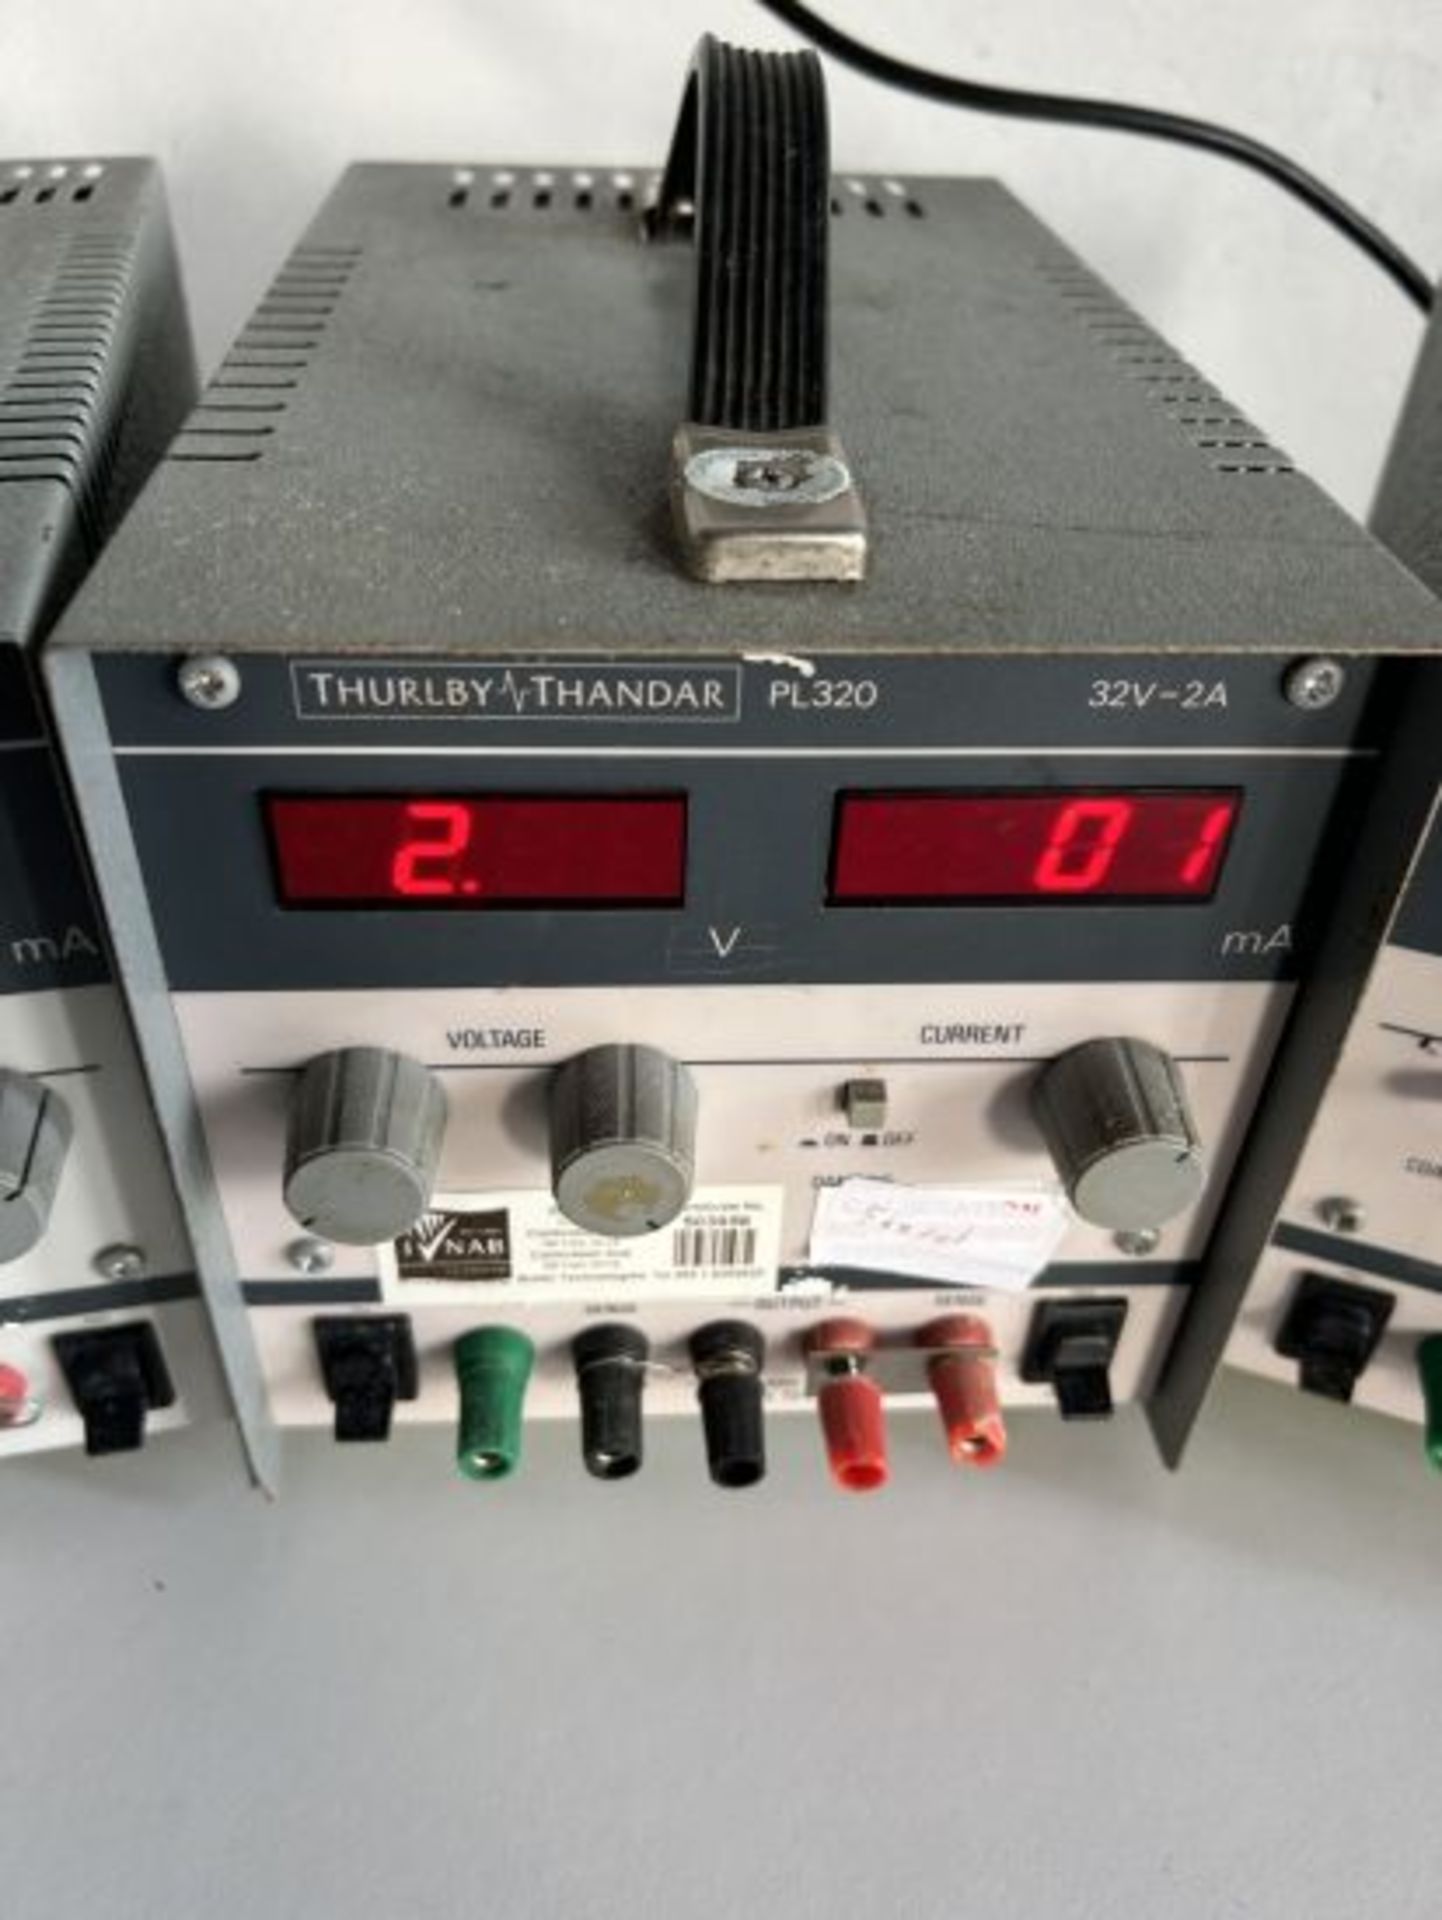 3 x Thurlby Thander PL-320 32V-2A Power Supply Units. - Image 3 of 4